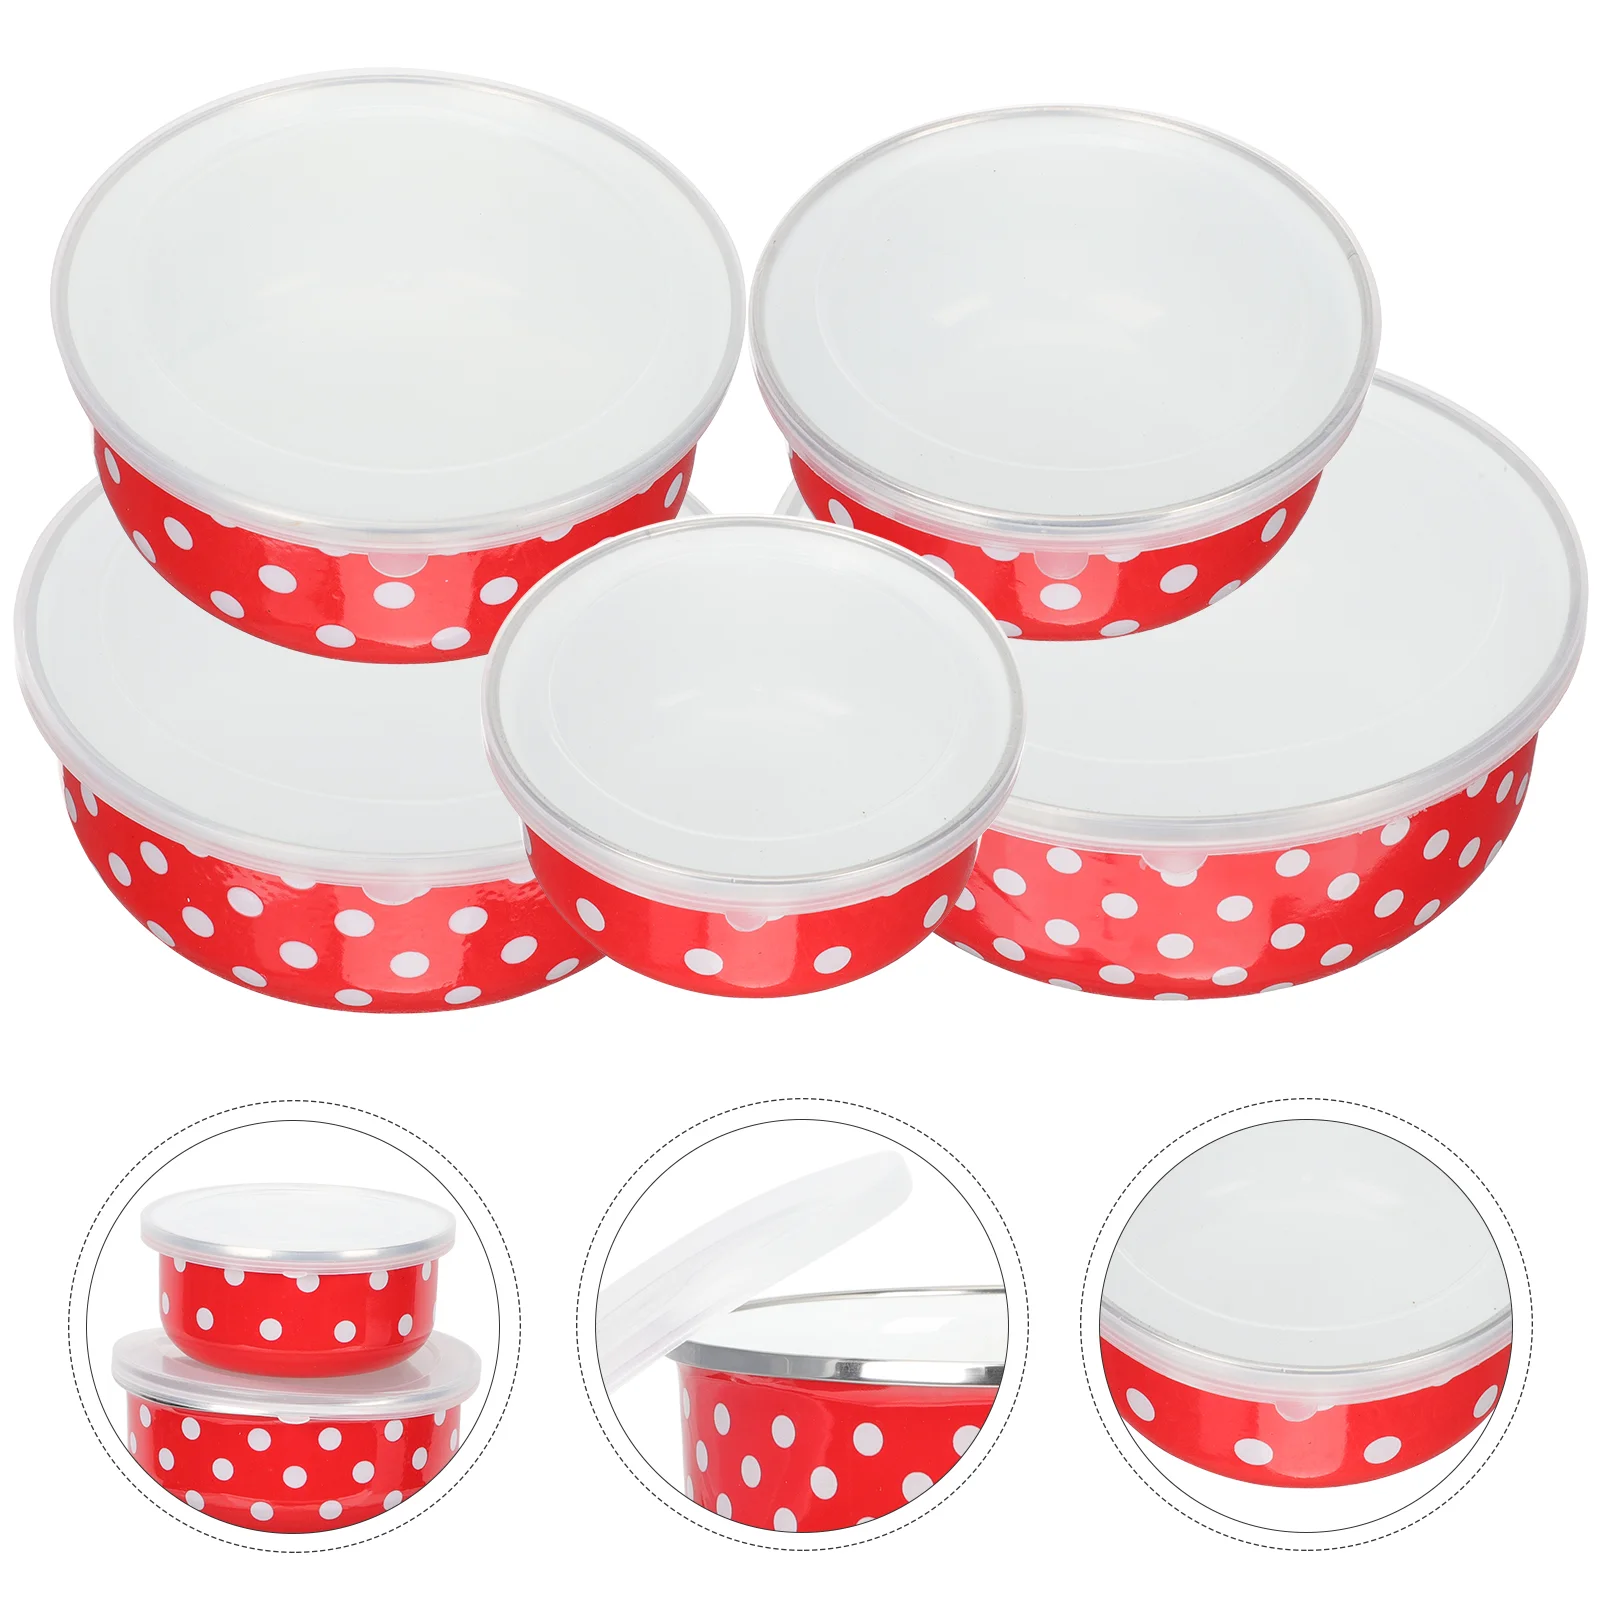 

5 Pcs Mixing Bowl Enamel Covered Child Ceramic Containers Lids Food Fresh Keeping Kitchen